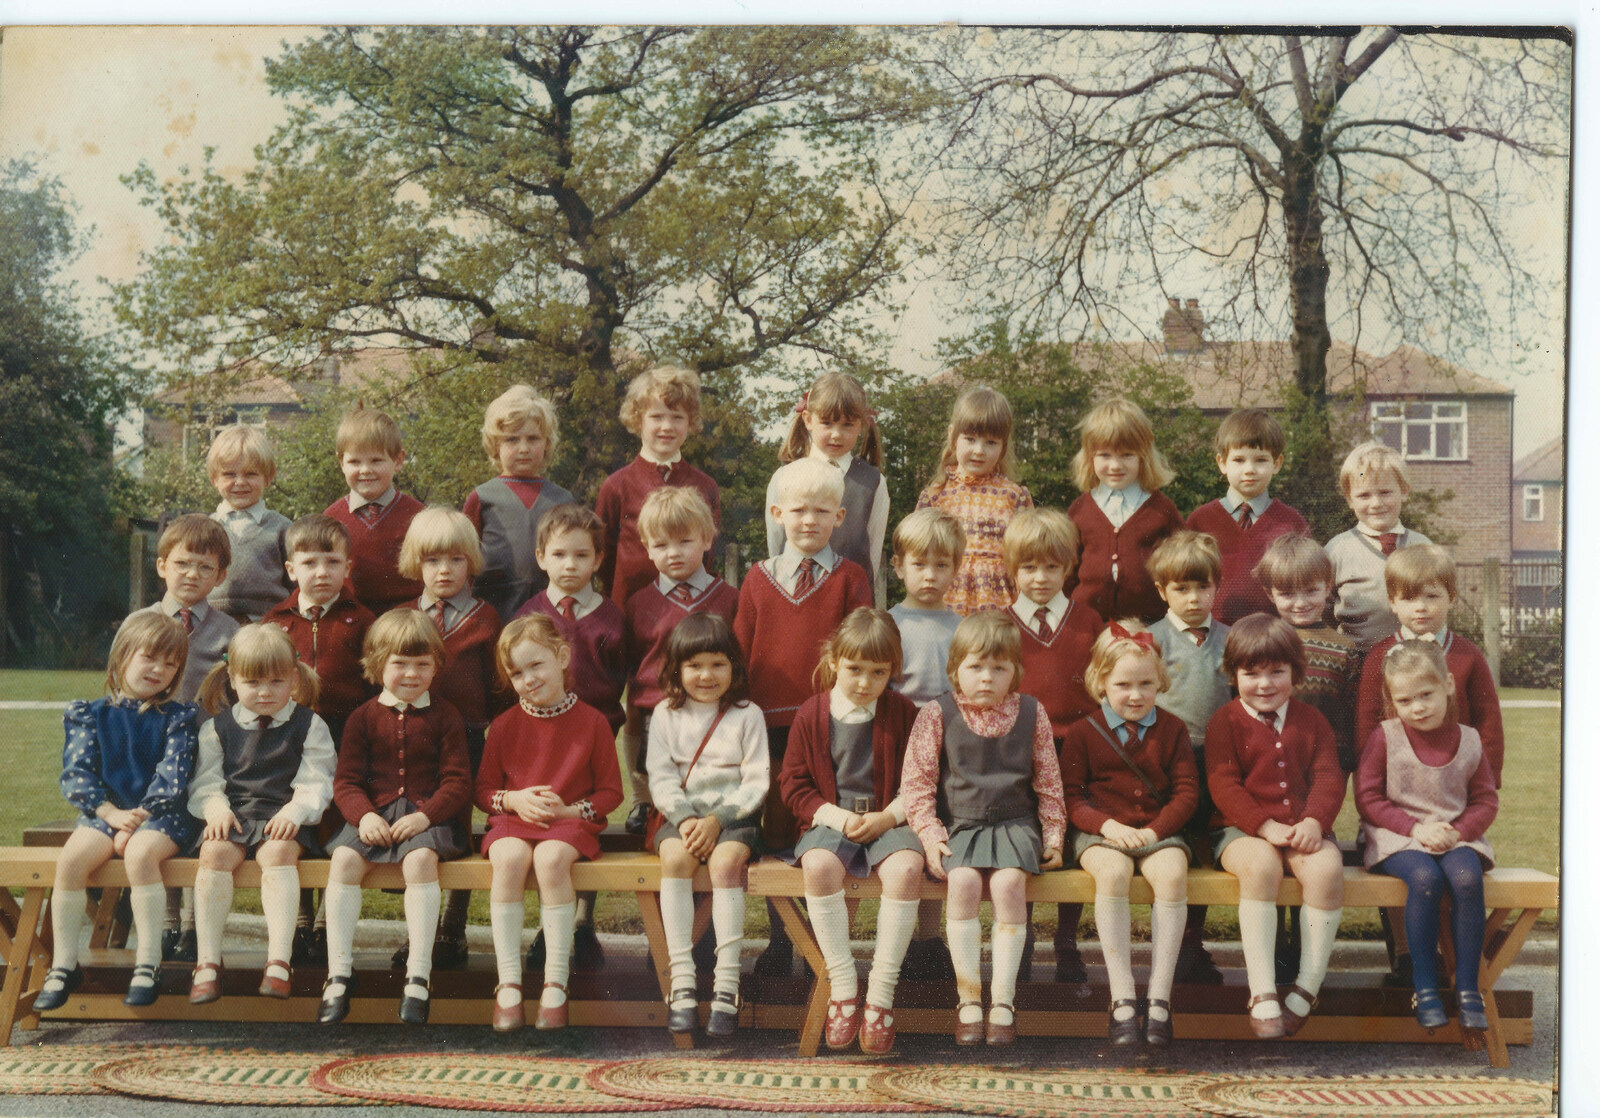  from Family History: The 1970s, Timperley and Sandbach, Cheshire - 24th January 2020